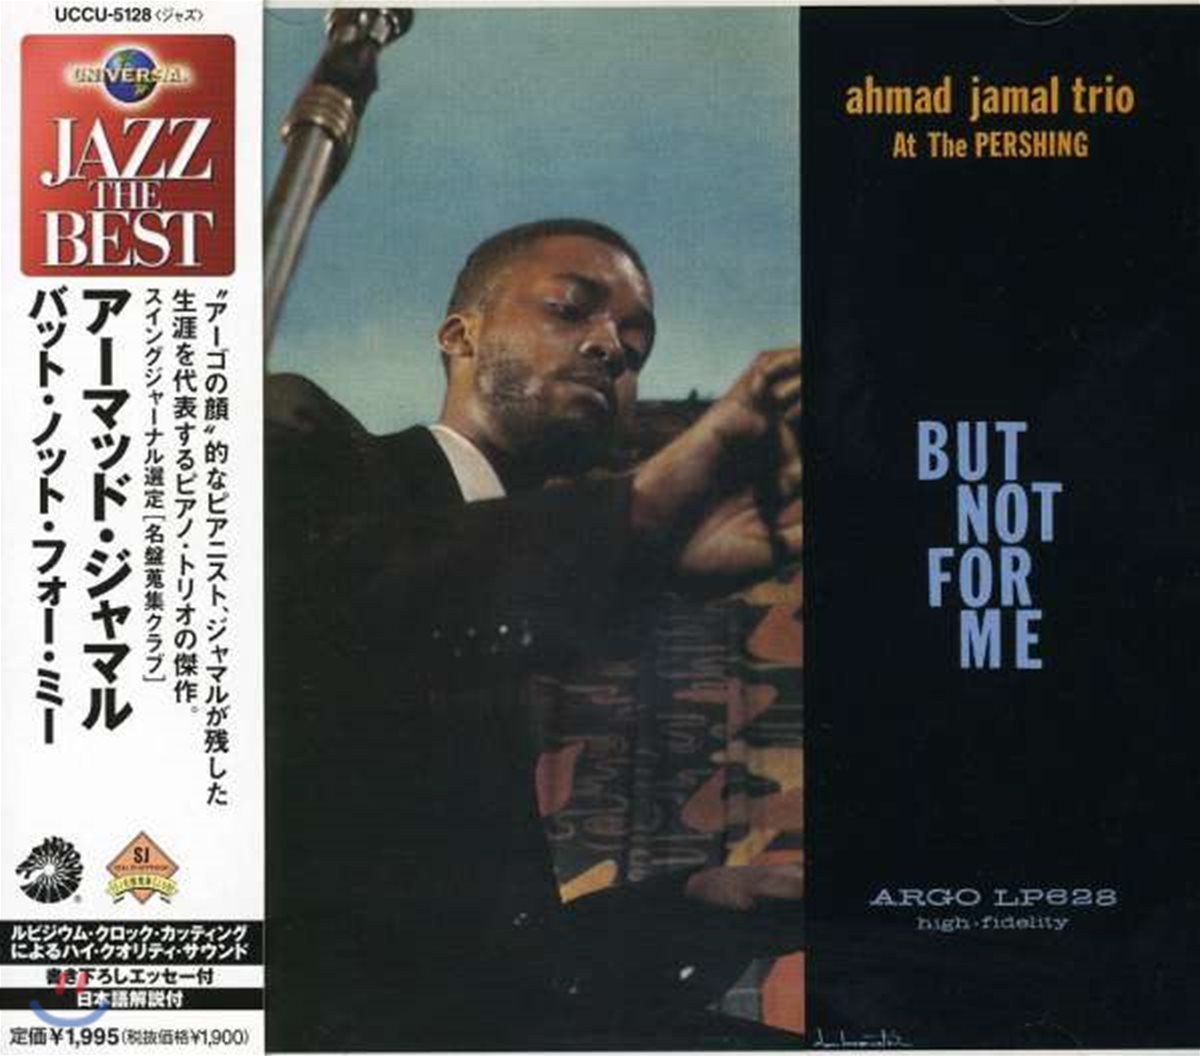 Ahmad Jamal Trio (아마드 자말 트리오) - But Not For Me: Live At The Pershing [Jazz The Best]